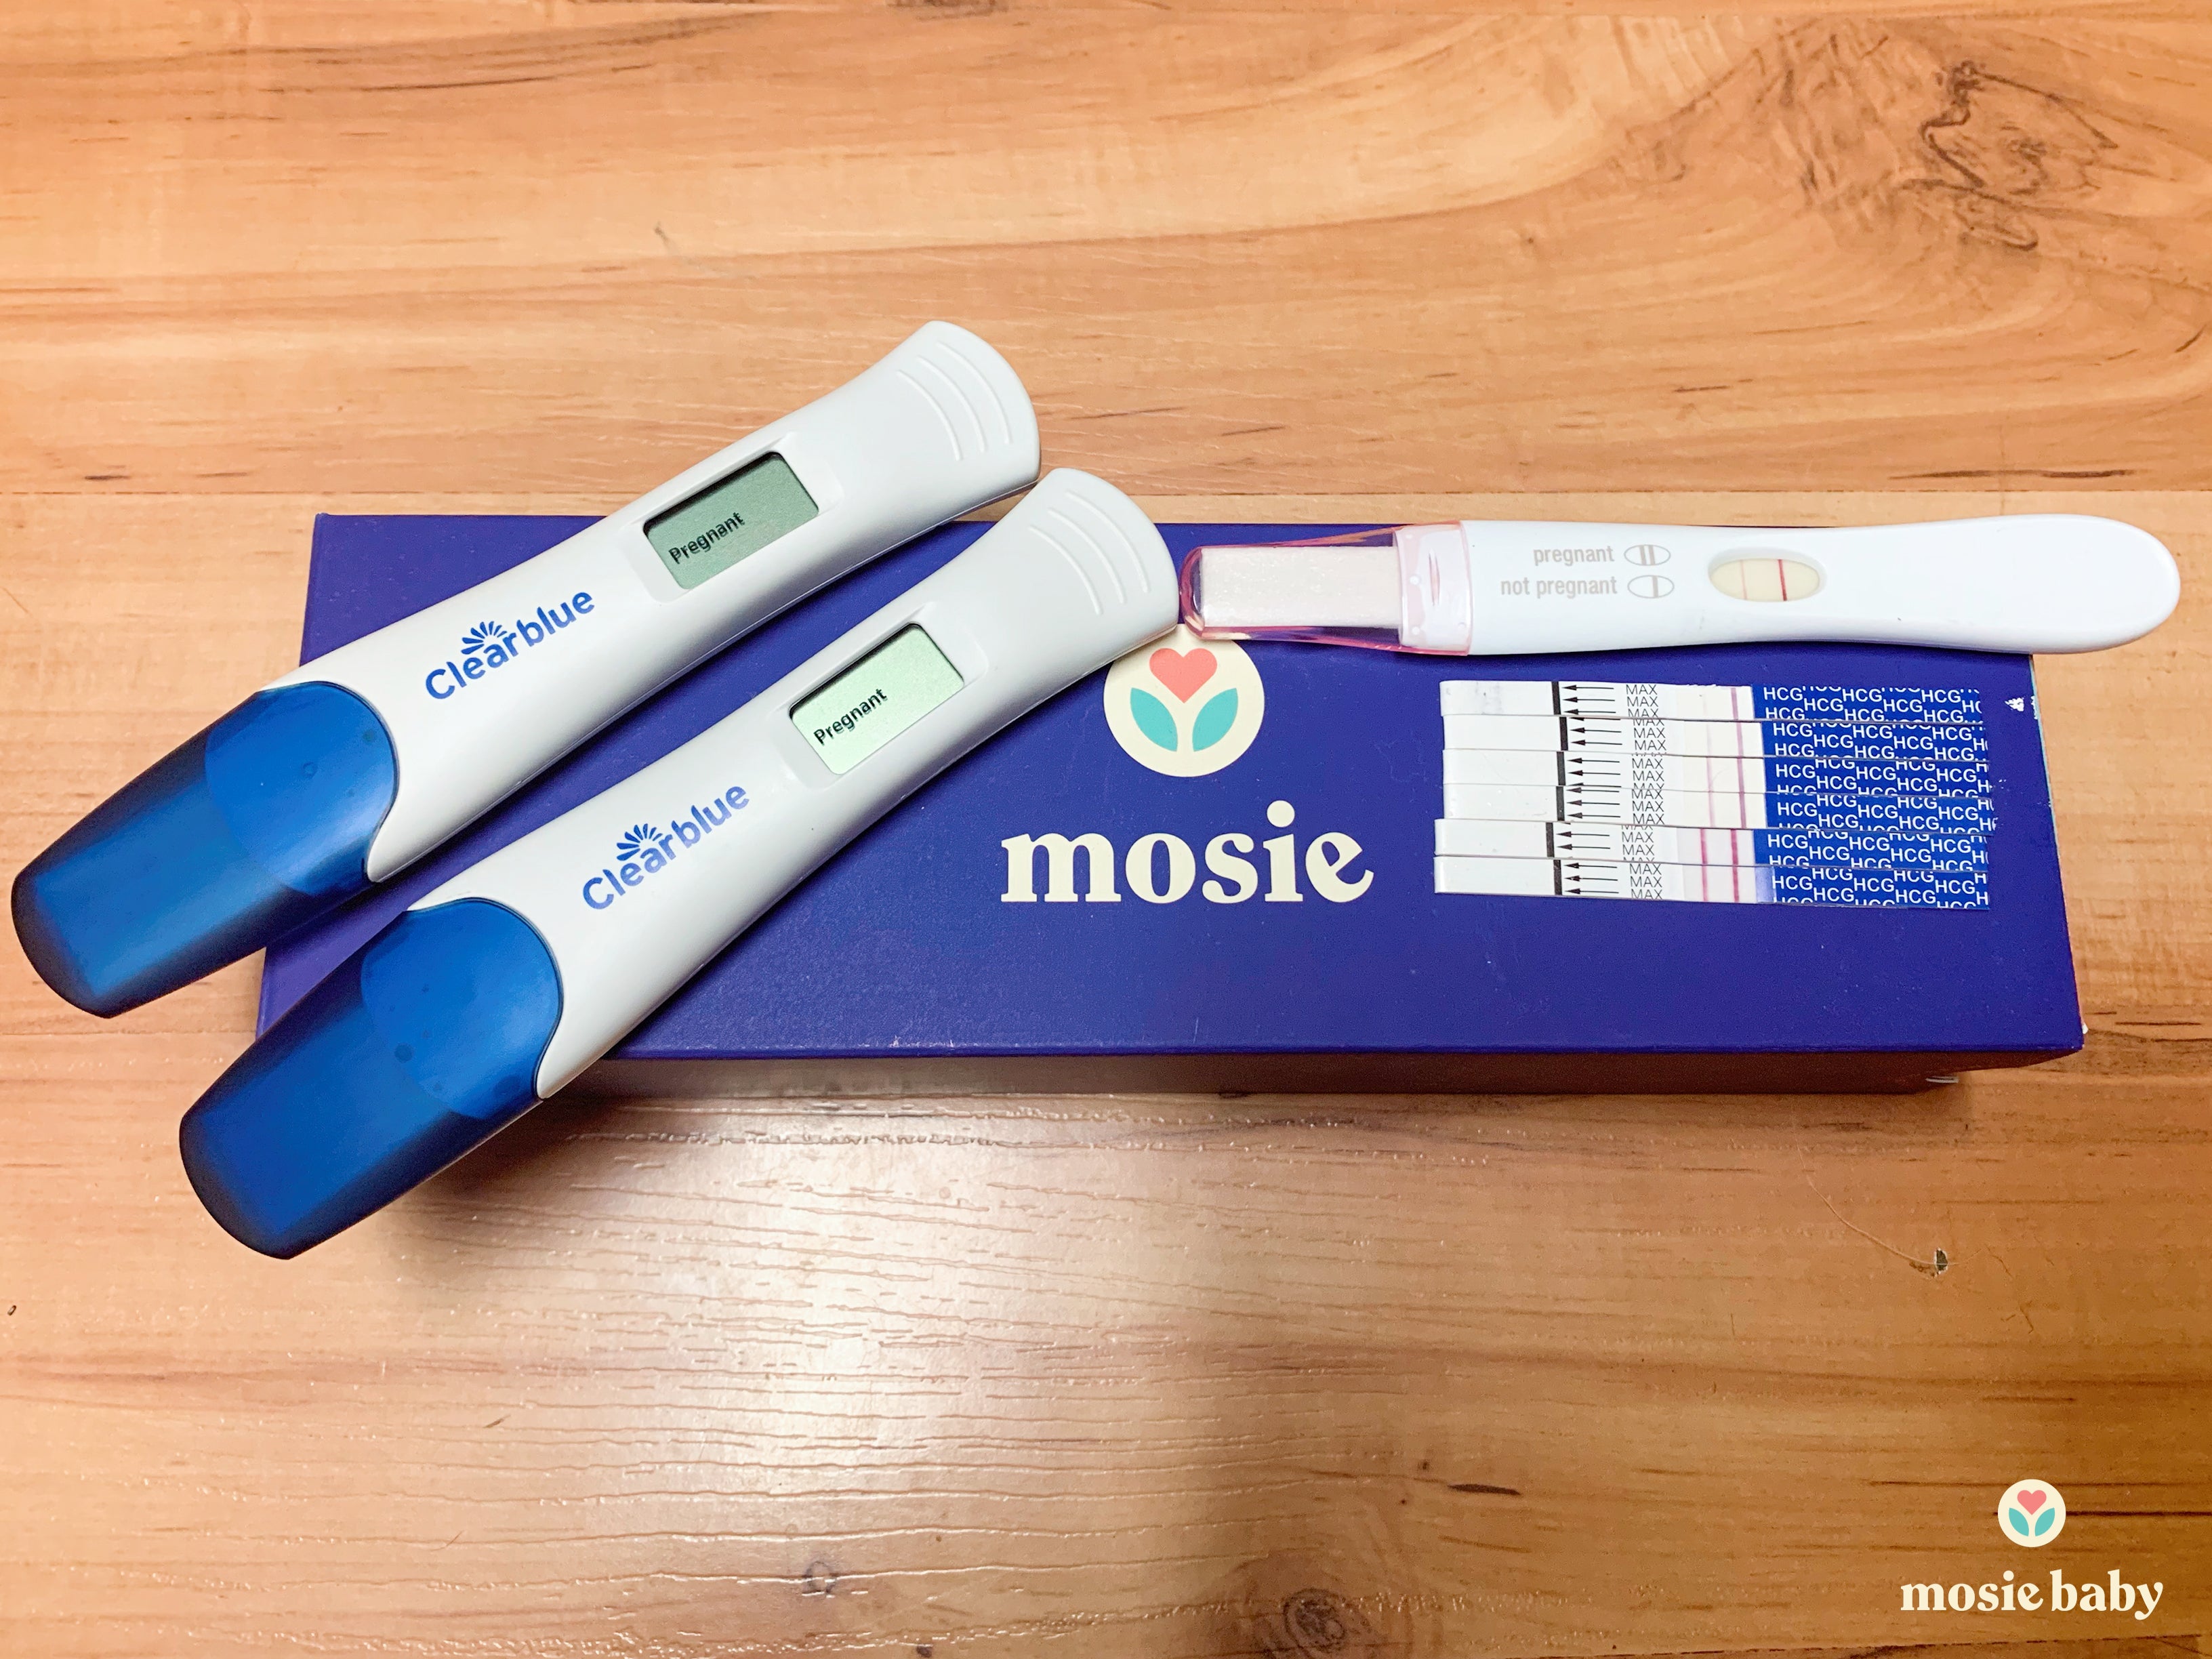 Three Years of Unexplained Infertility Then They Tried Mosie!